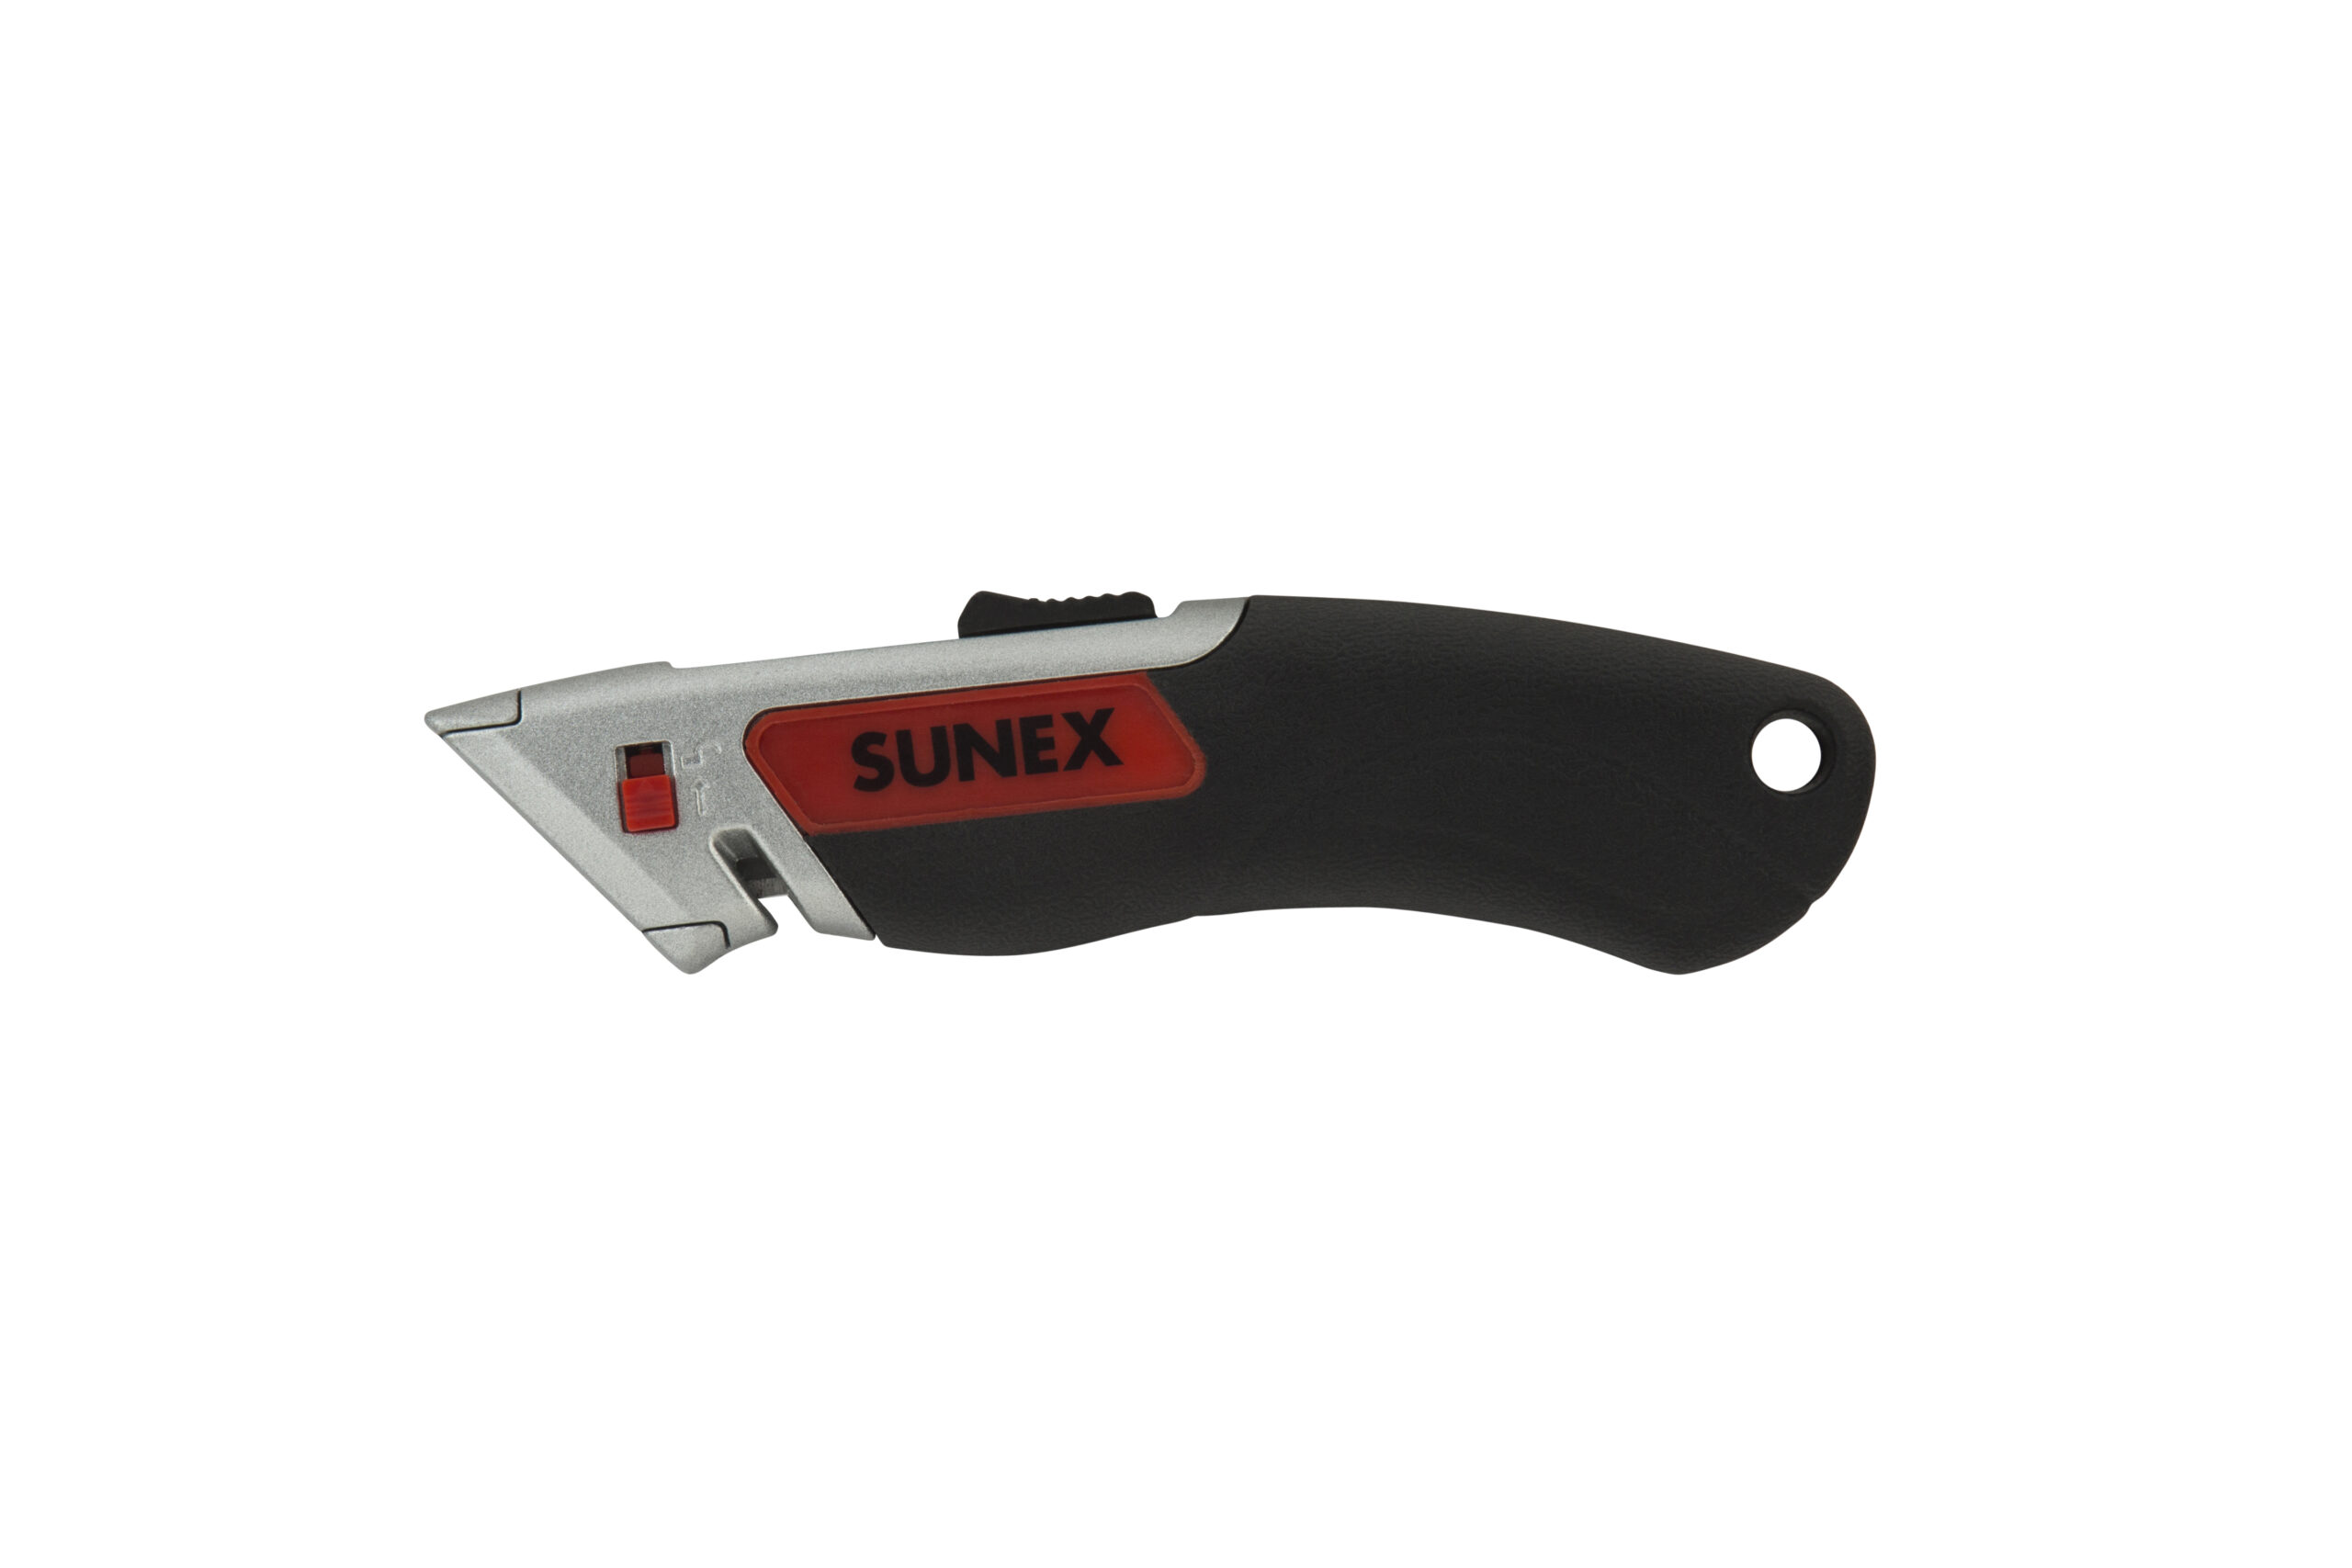 Retractable Blade Utility Razor Knife, from Best Materials